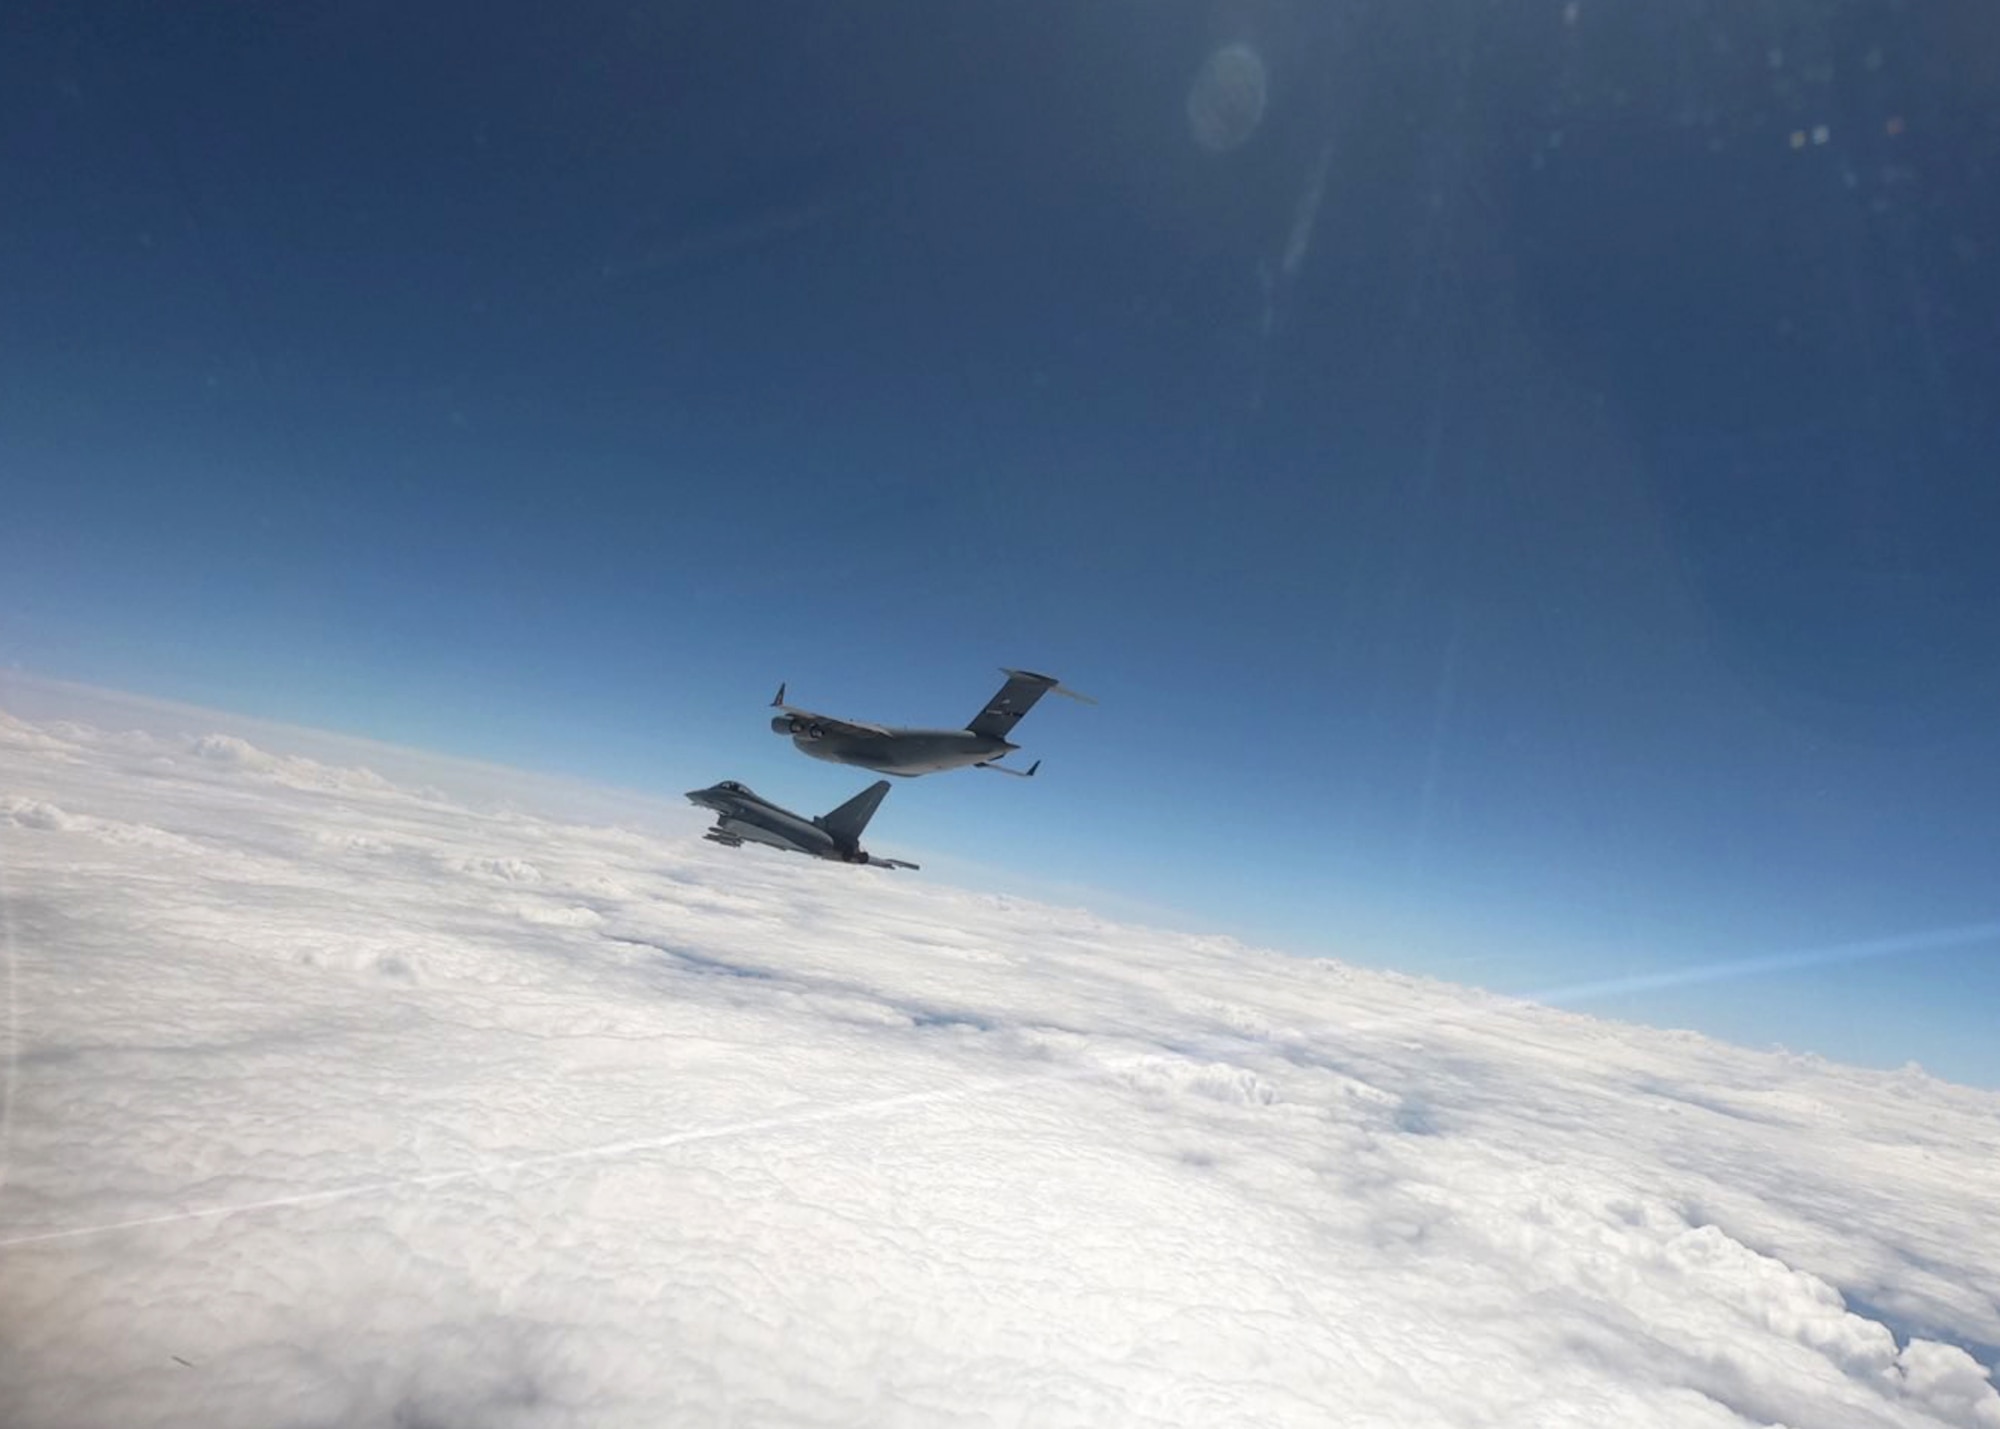 A U.S. Air Force C-17 Globemaster III aircraft assigned to the 105th Airlift Wing, New York National Guard, is intercepted by an Austrian Eurofighter, assigned to the Überwachungsgeschwader, during exercise Air Defender 2023 at Zeltweg Air Base, Austria, June 15, 2023.